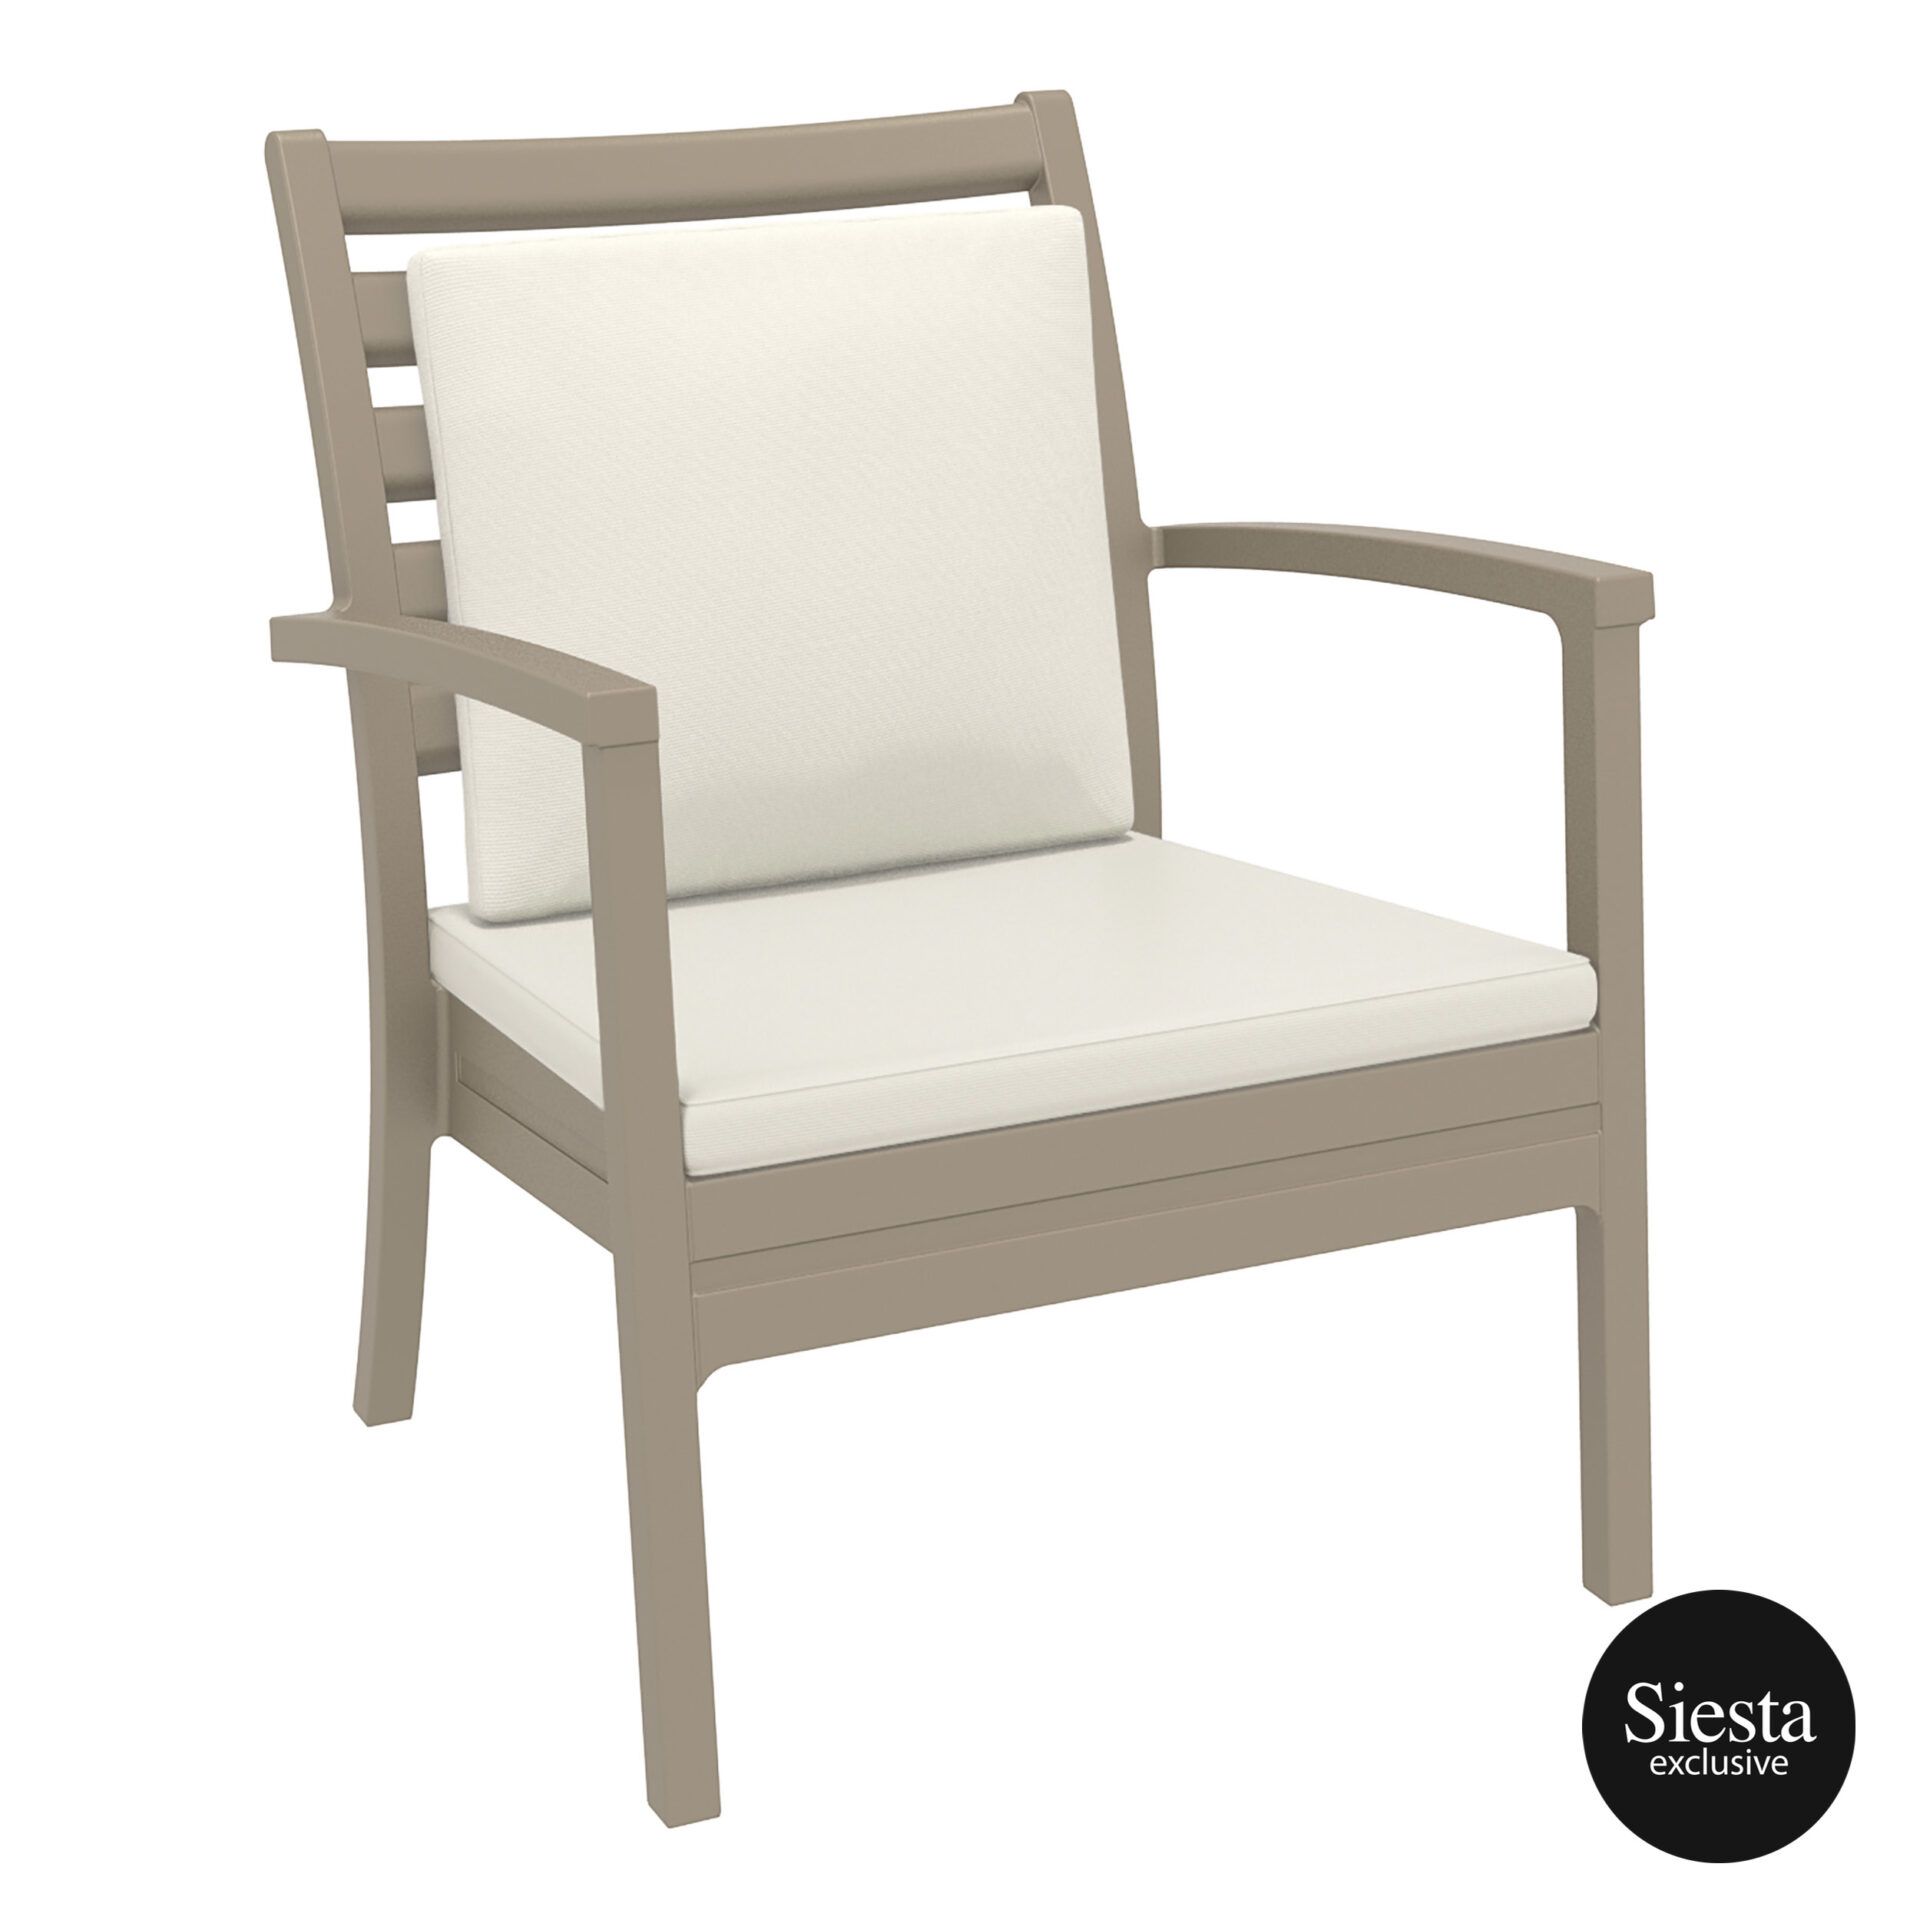 Artemis XL Armchair - Taupe with Beige Seat and Back Cushion